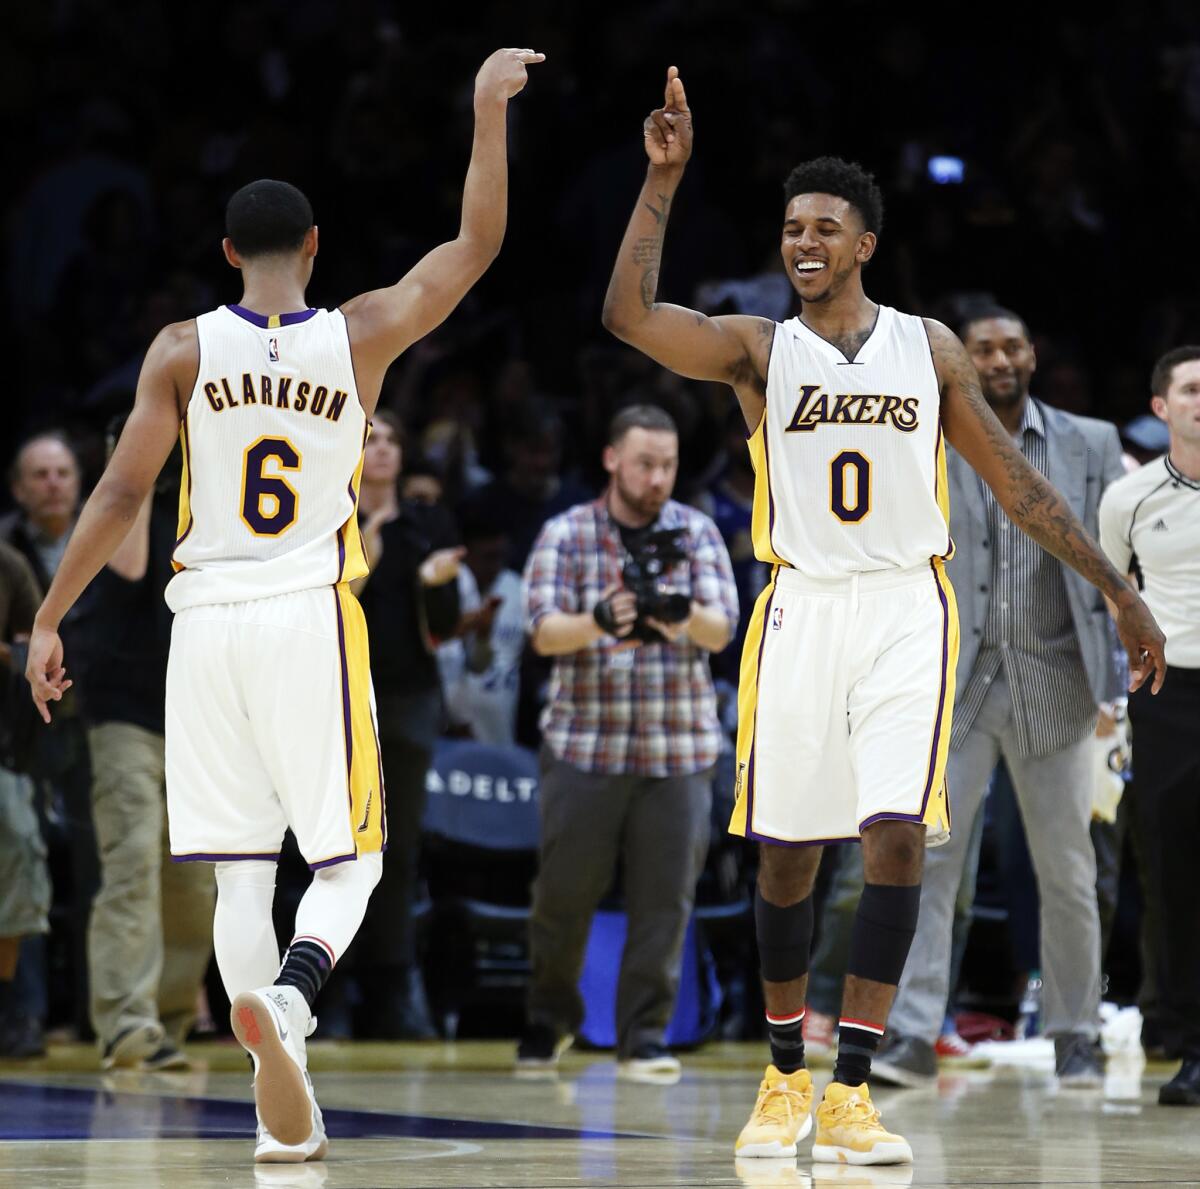 Lakers guard Jordan Clarkson (6) celebrates with guard Nick Young after defeating the Phoenix Suns, 119-108, on Nov. 6.